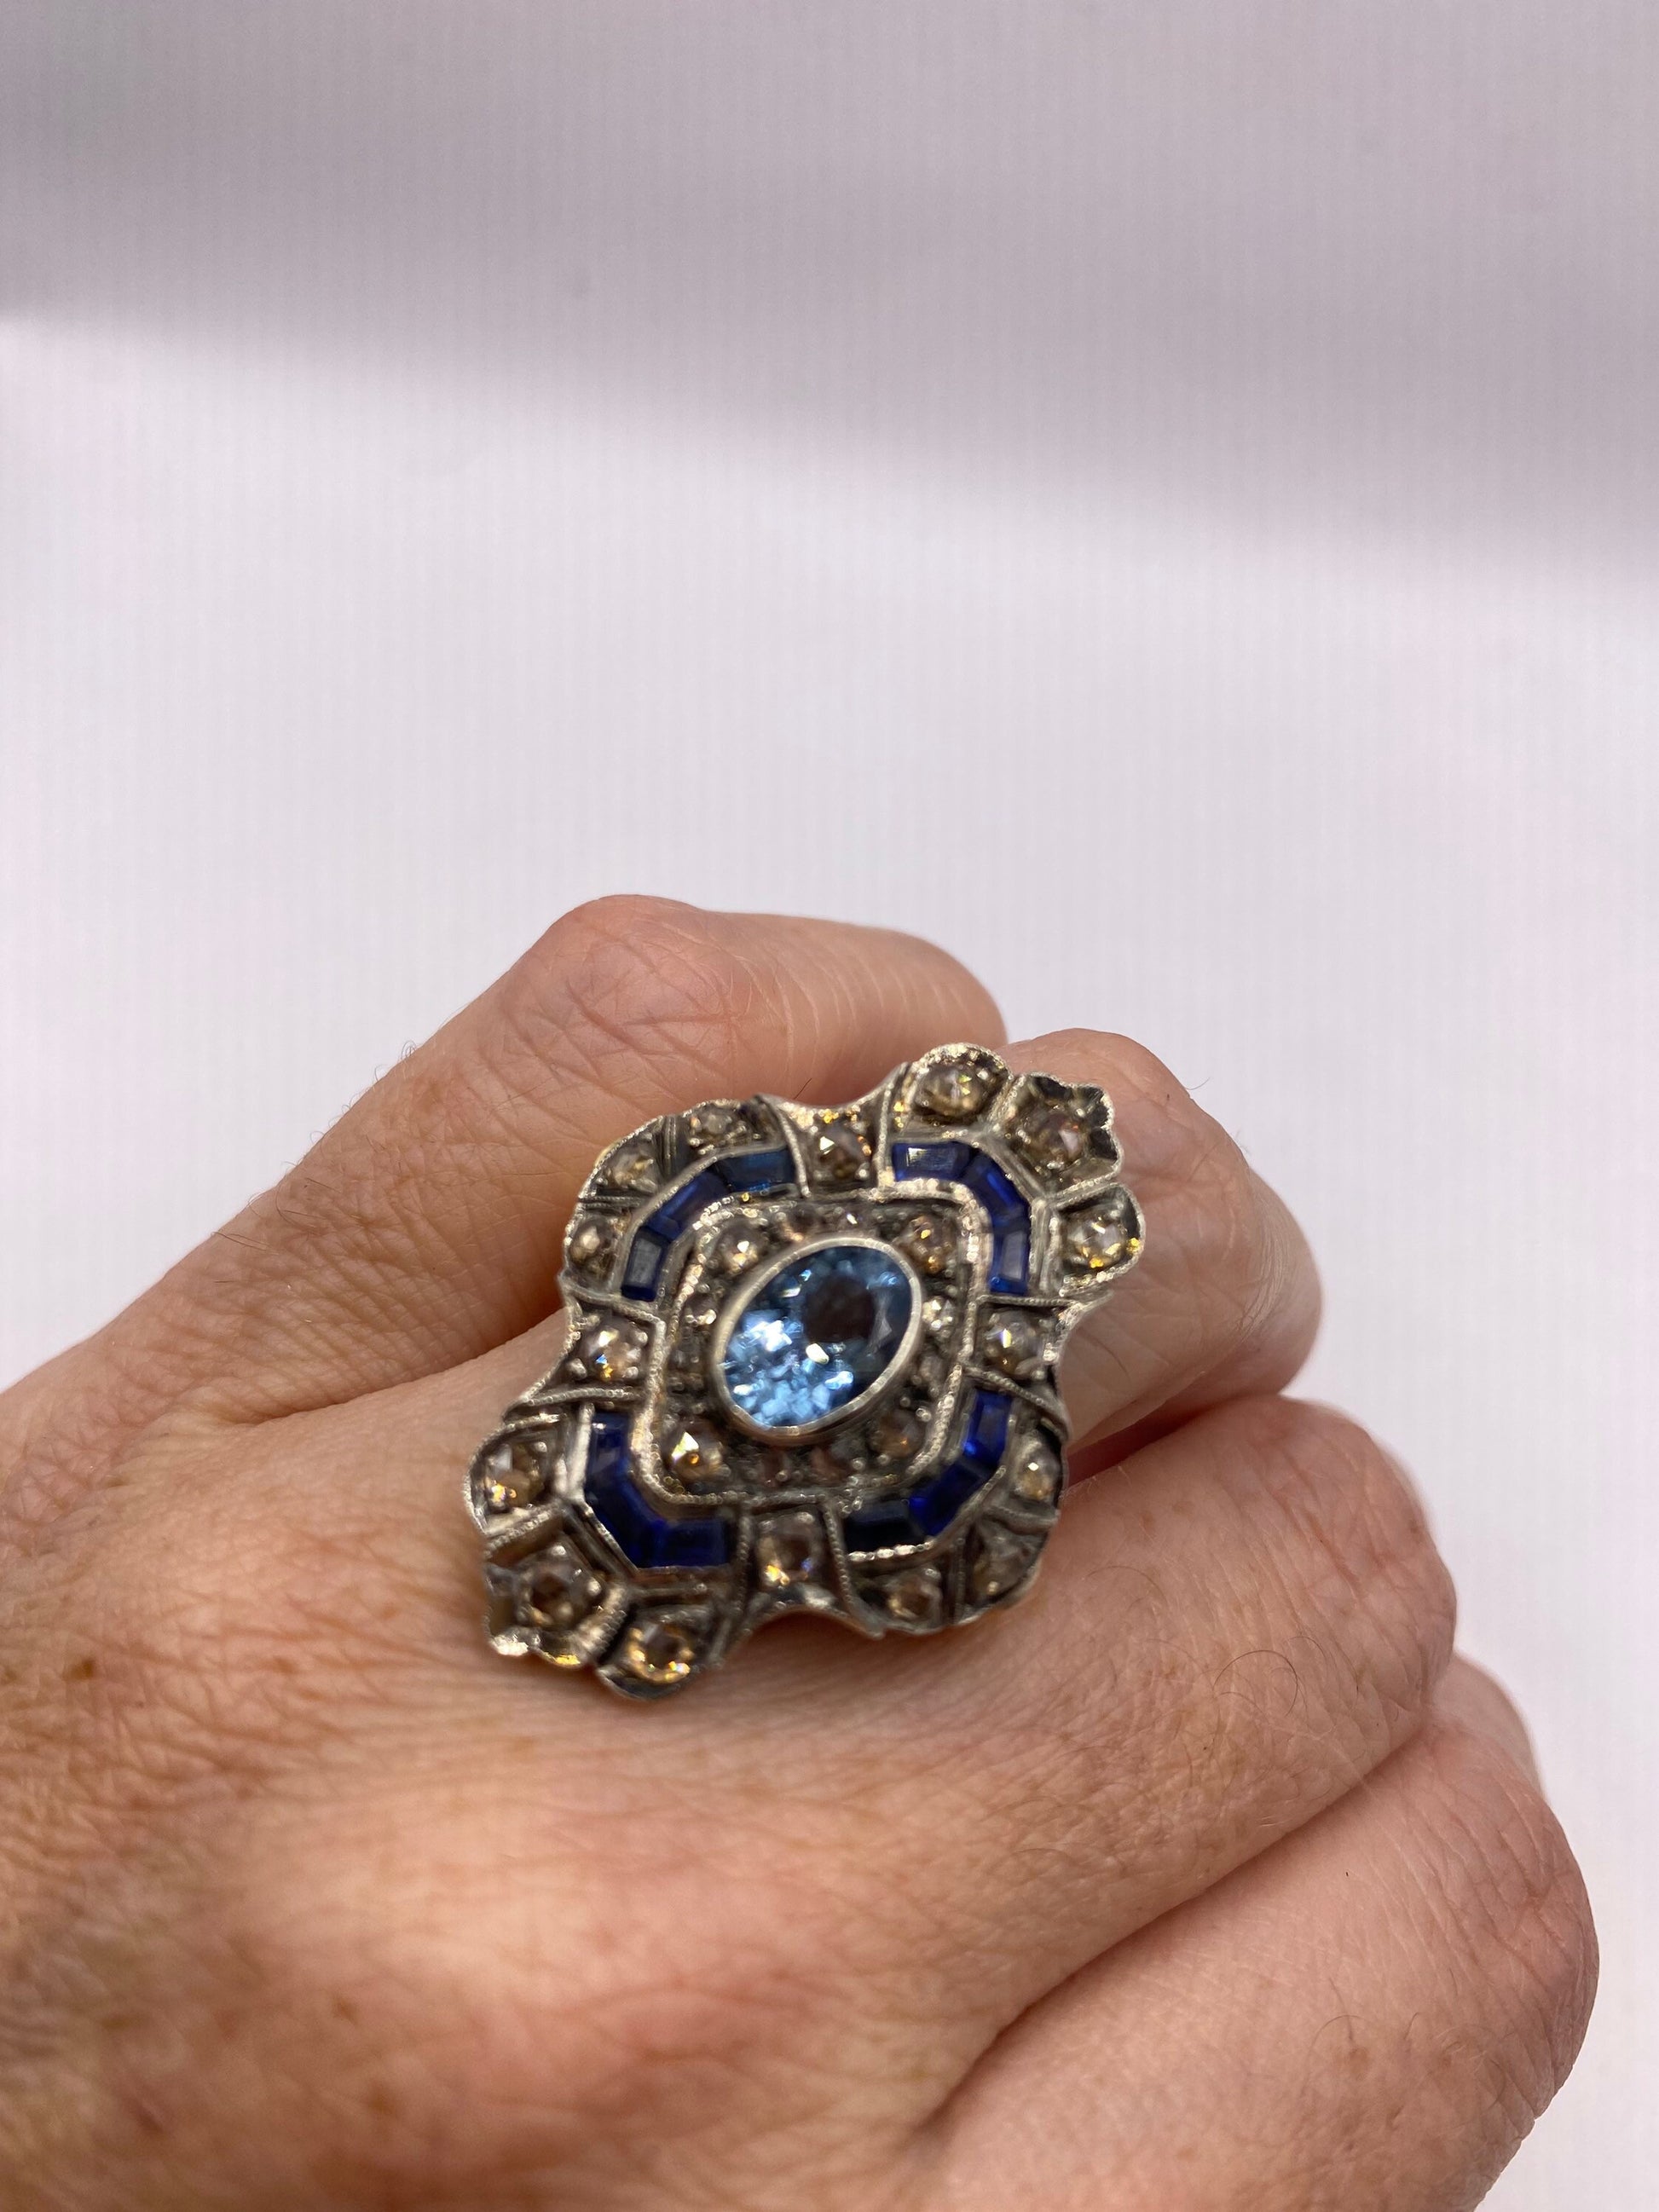 Vintage Blue Topaz Sapphire with Rose Cut Diamond in 925 Sterling Silver and 18k Gold Cocktail Ring